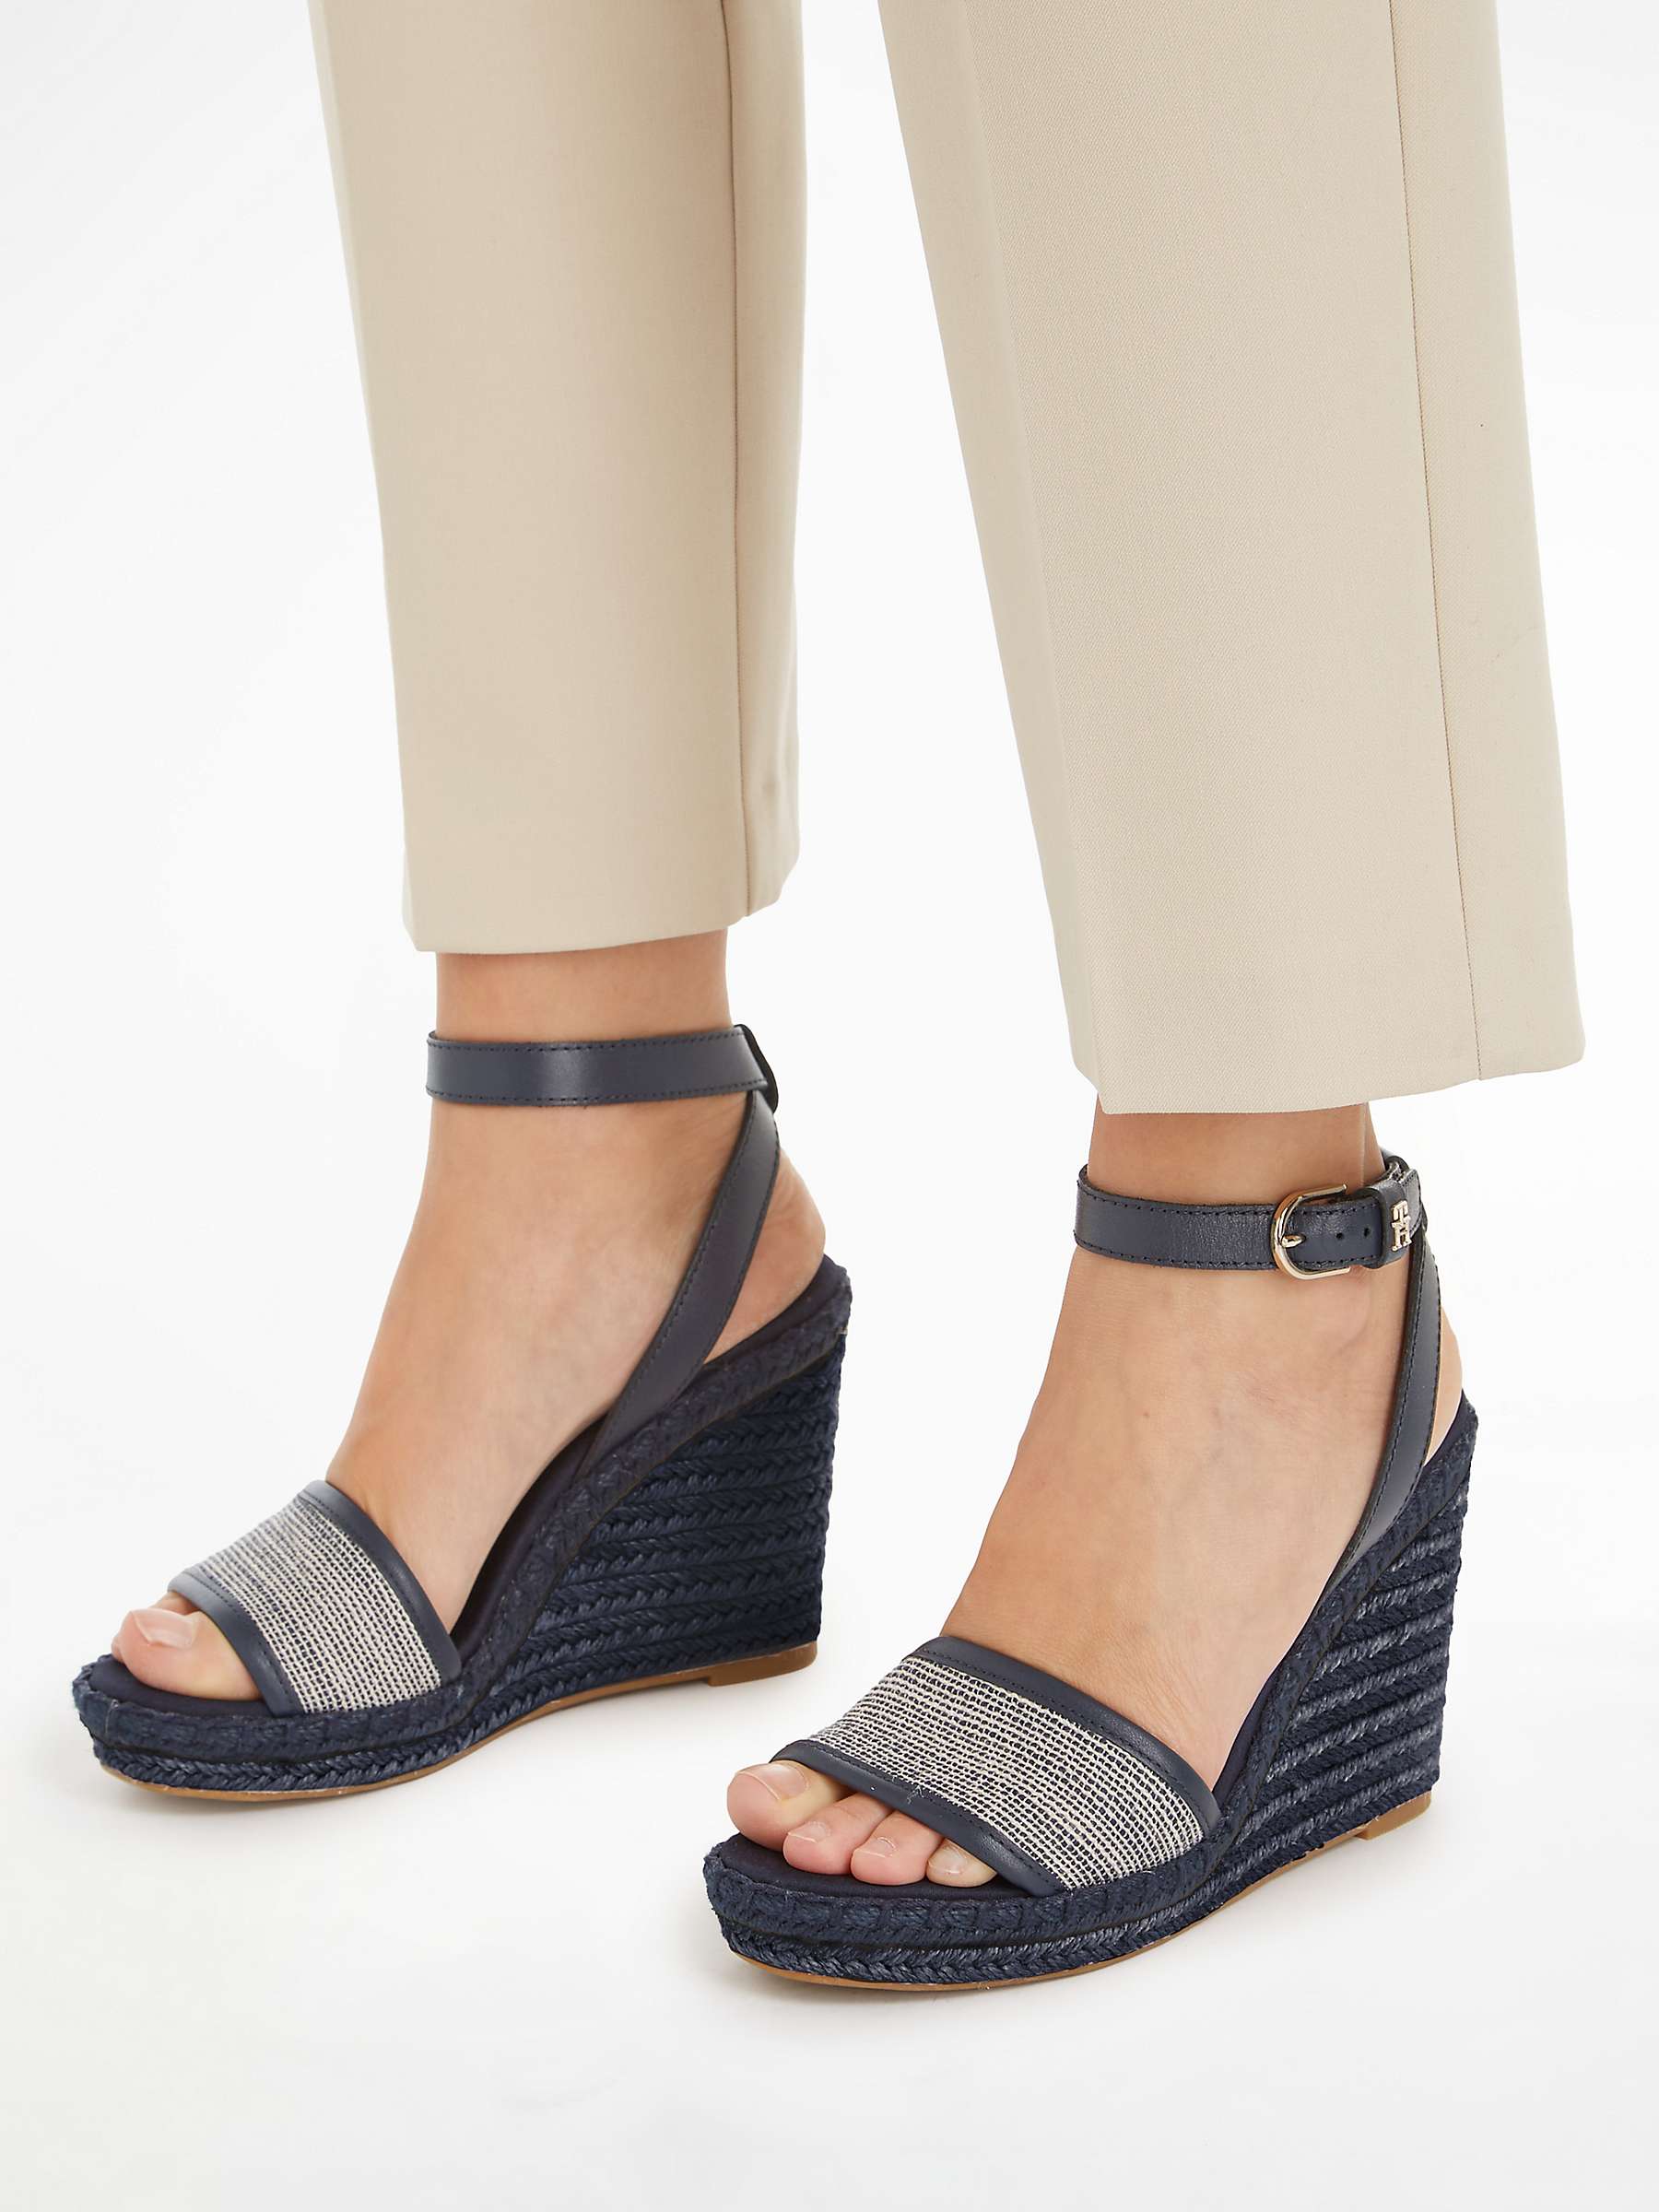 Buy Tommy Hilfiger Woven Wedge Leather Sandals, Space Blue Online at johnlewis.com